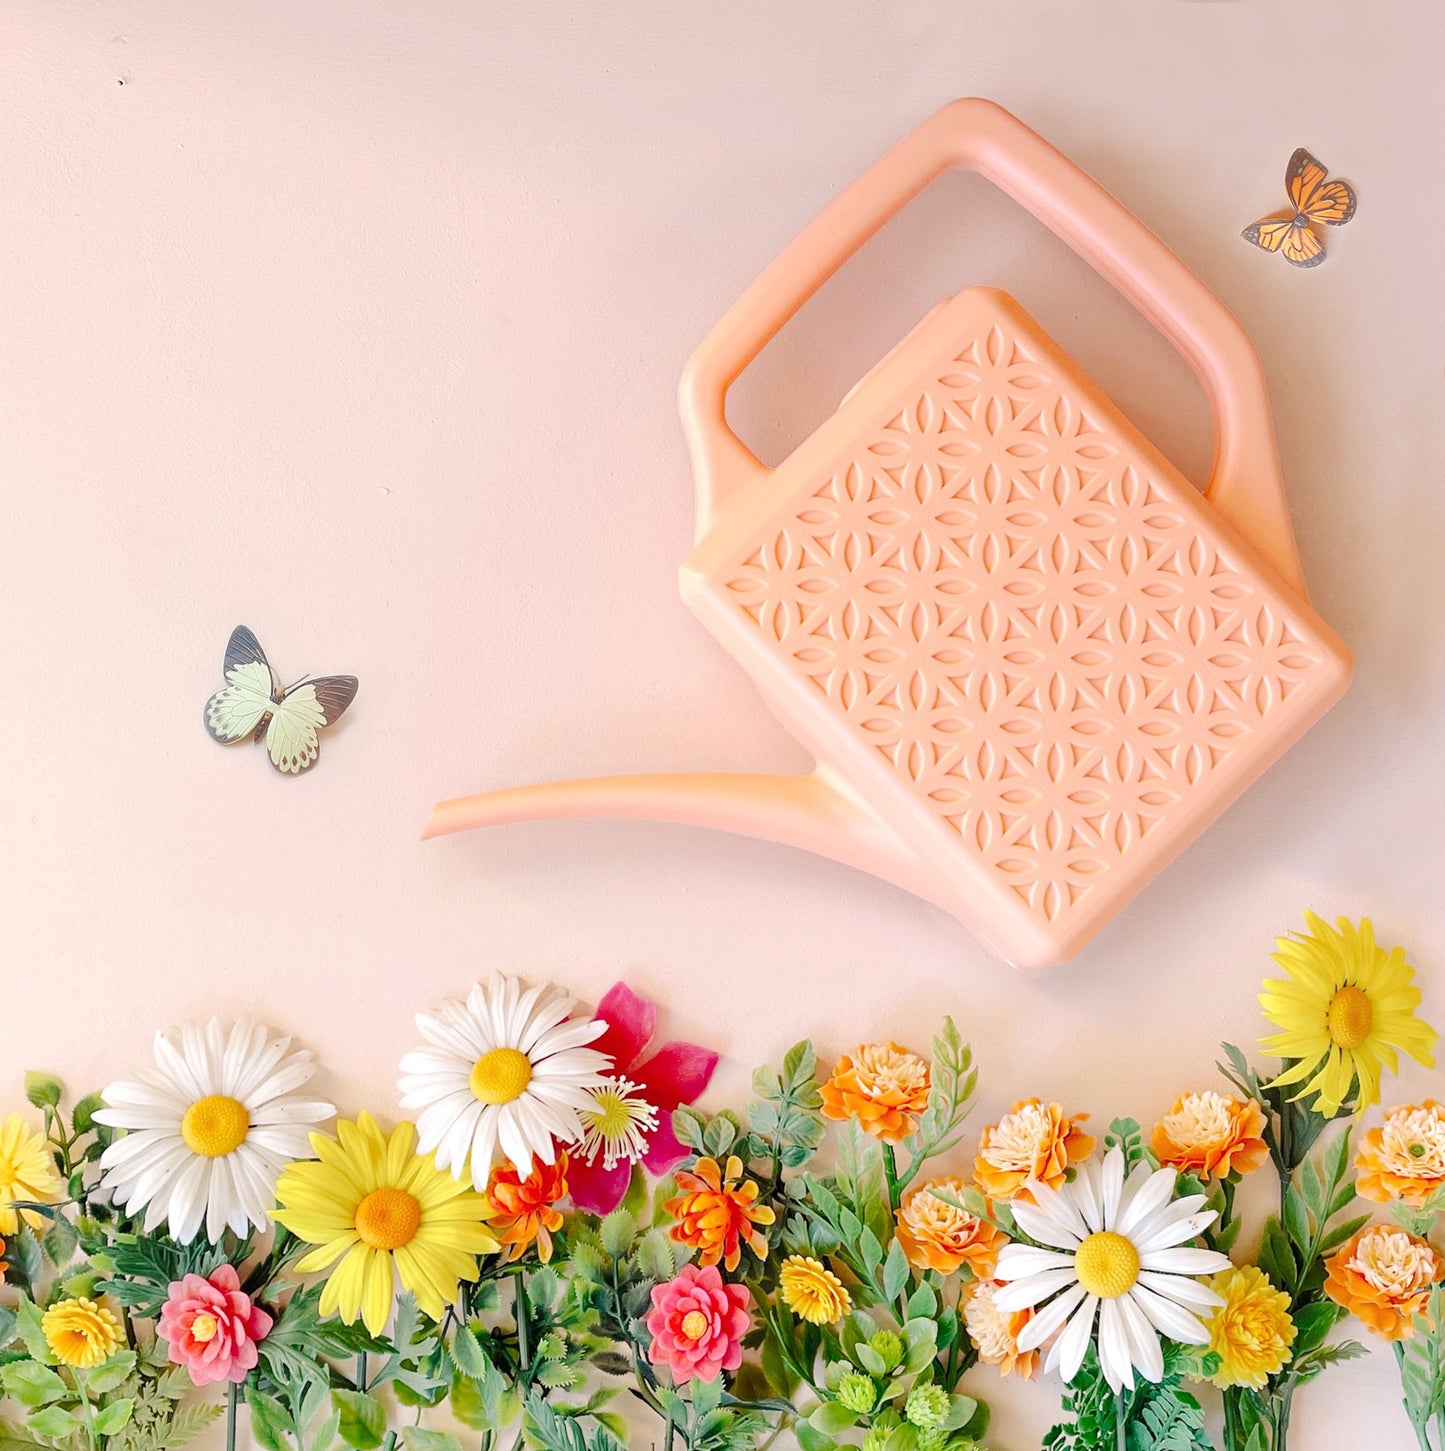 On a pink background is a pink plastic watering can with a breeze block design on both sides along with a long spout and a squared off handle for easy watering. It's staged on top of a row of colorful flowers as if its watering alongside two butterflies.